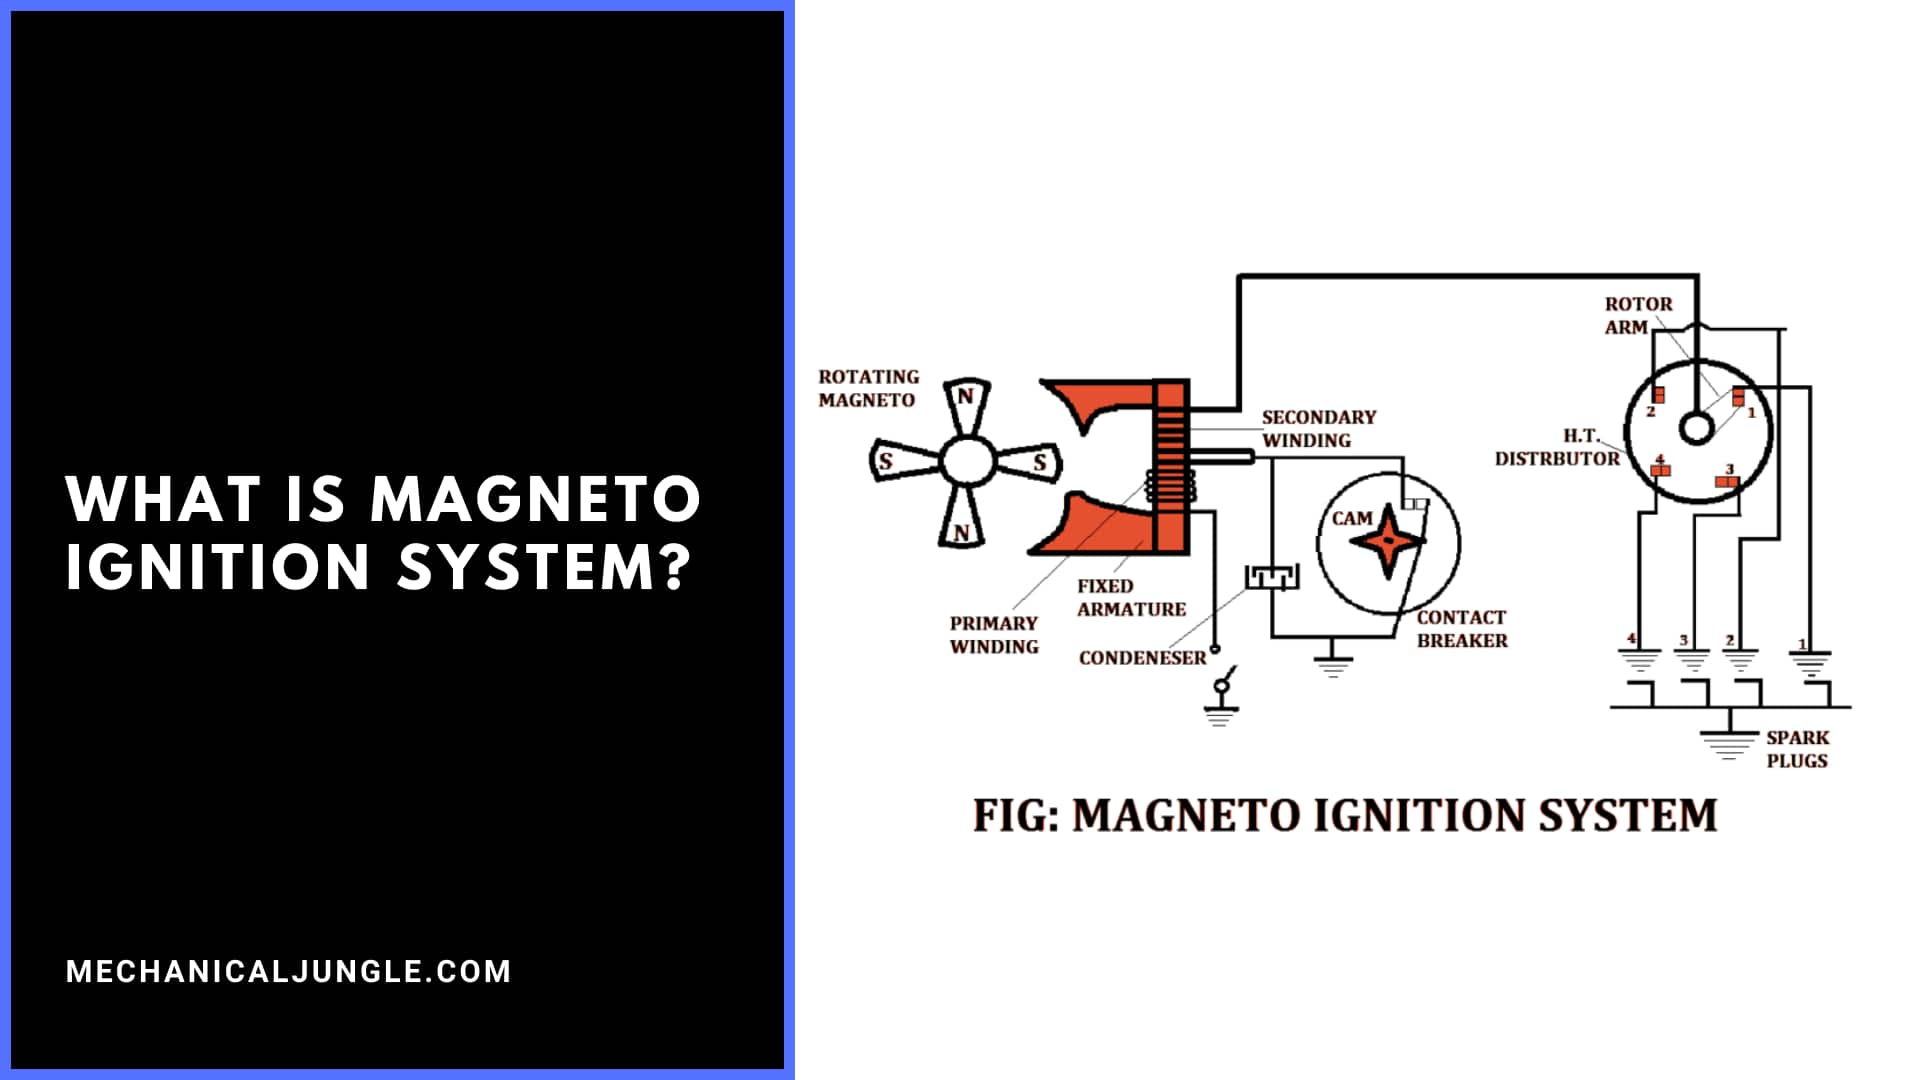 What Is Magneto Ignition System?